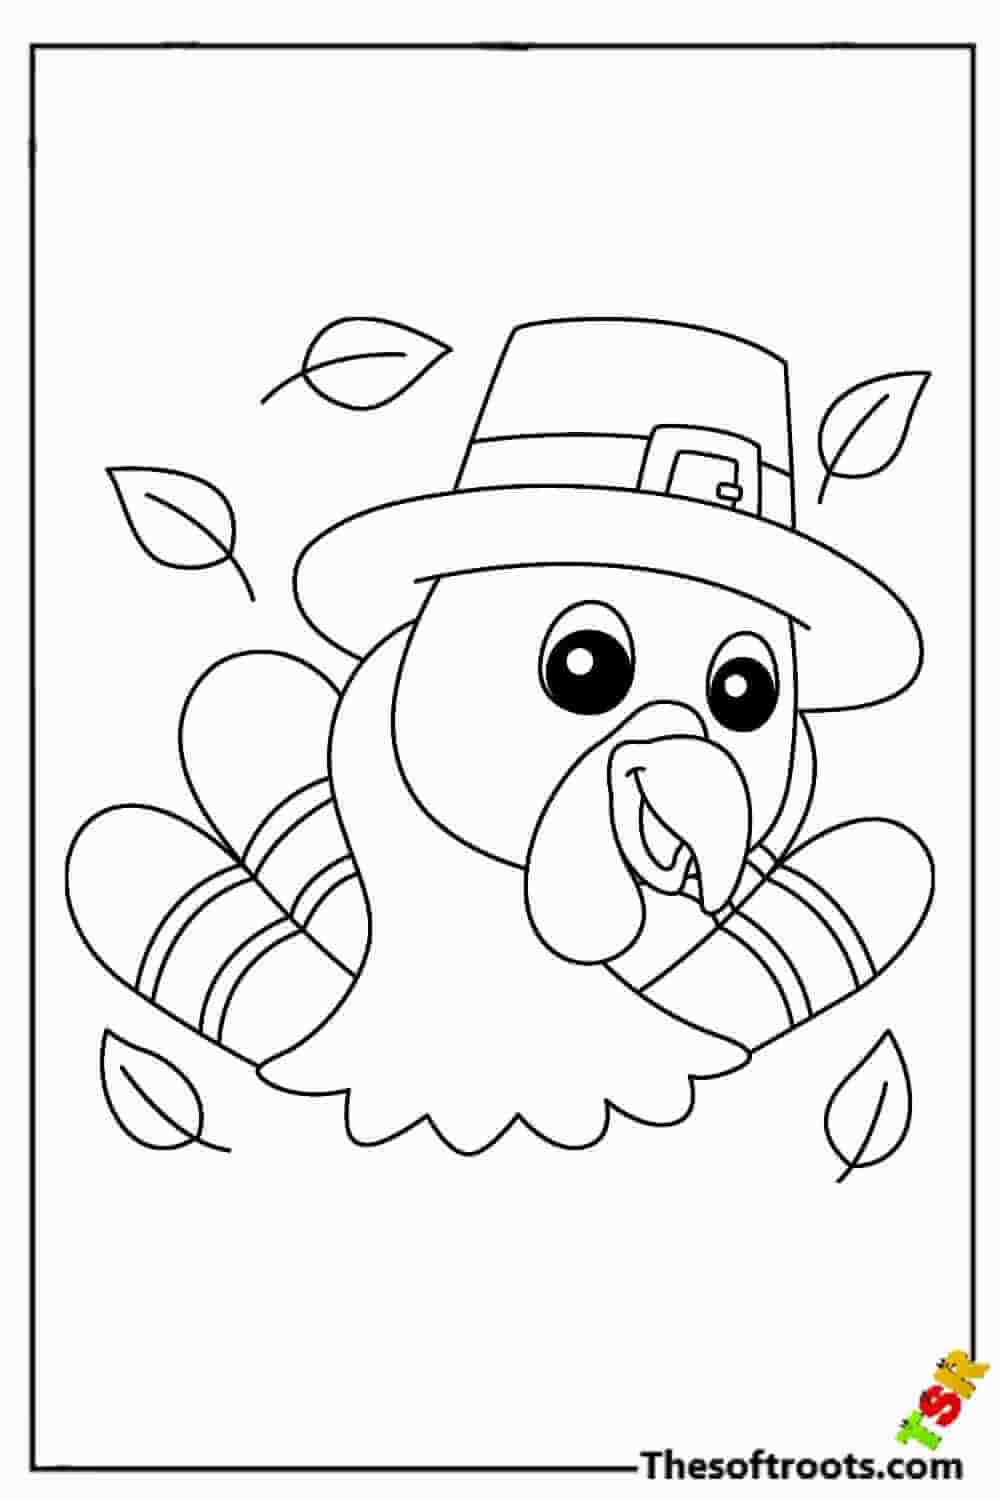 Turkey head coloring pages